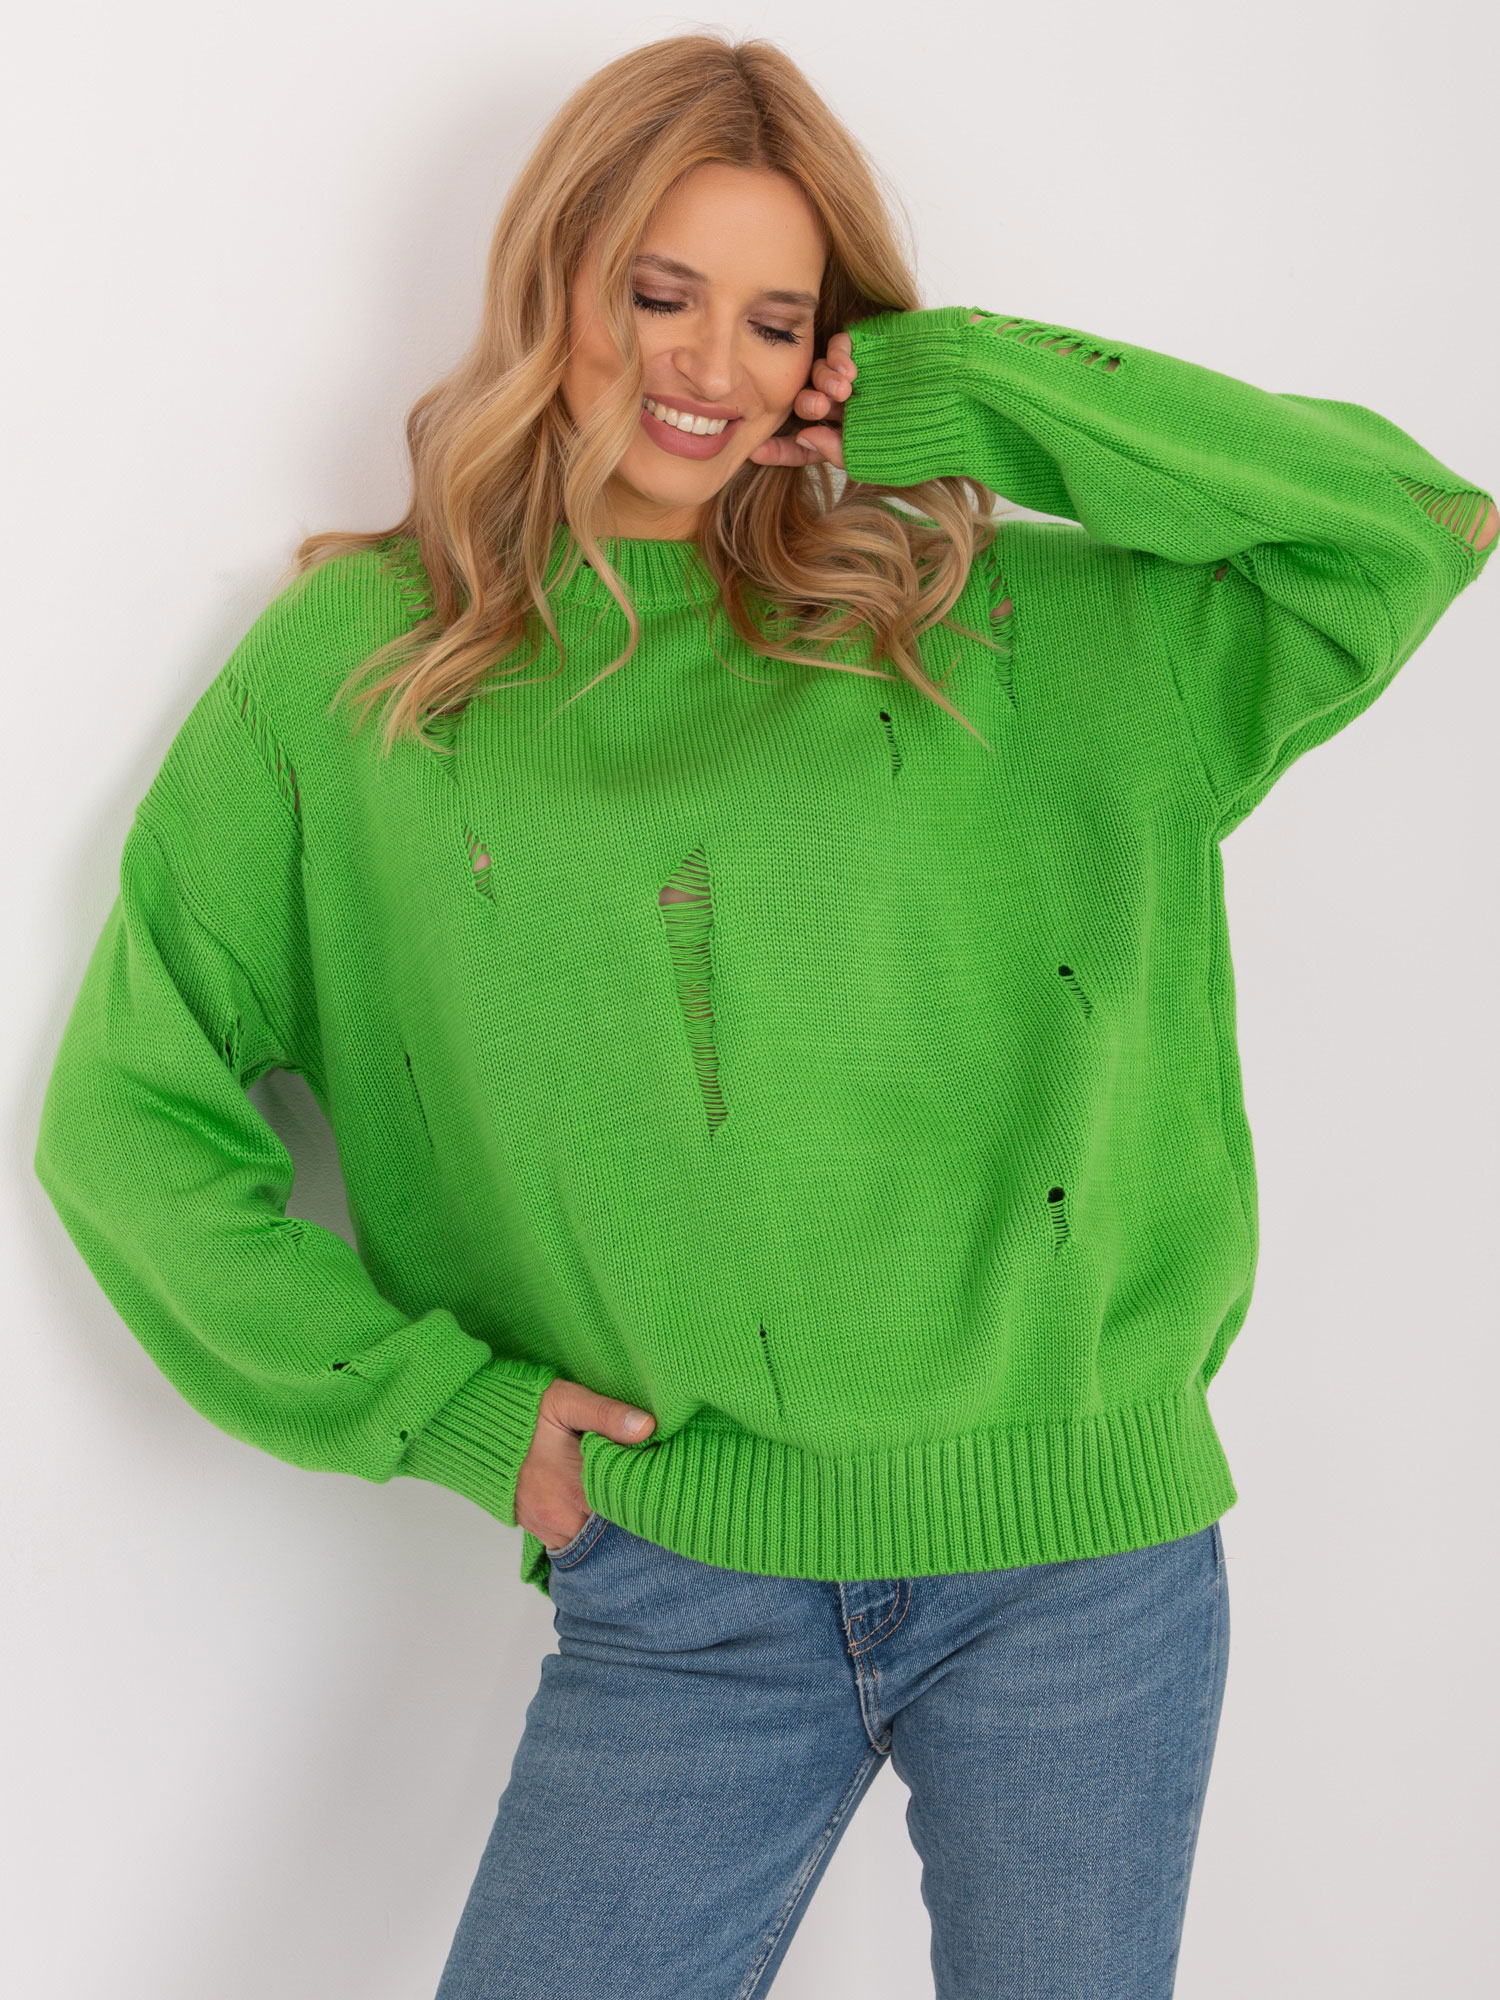 Light green women's oversize sweater with holes